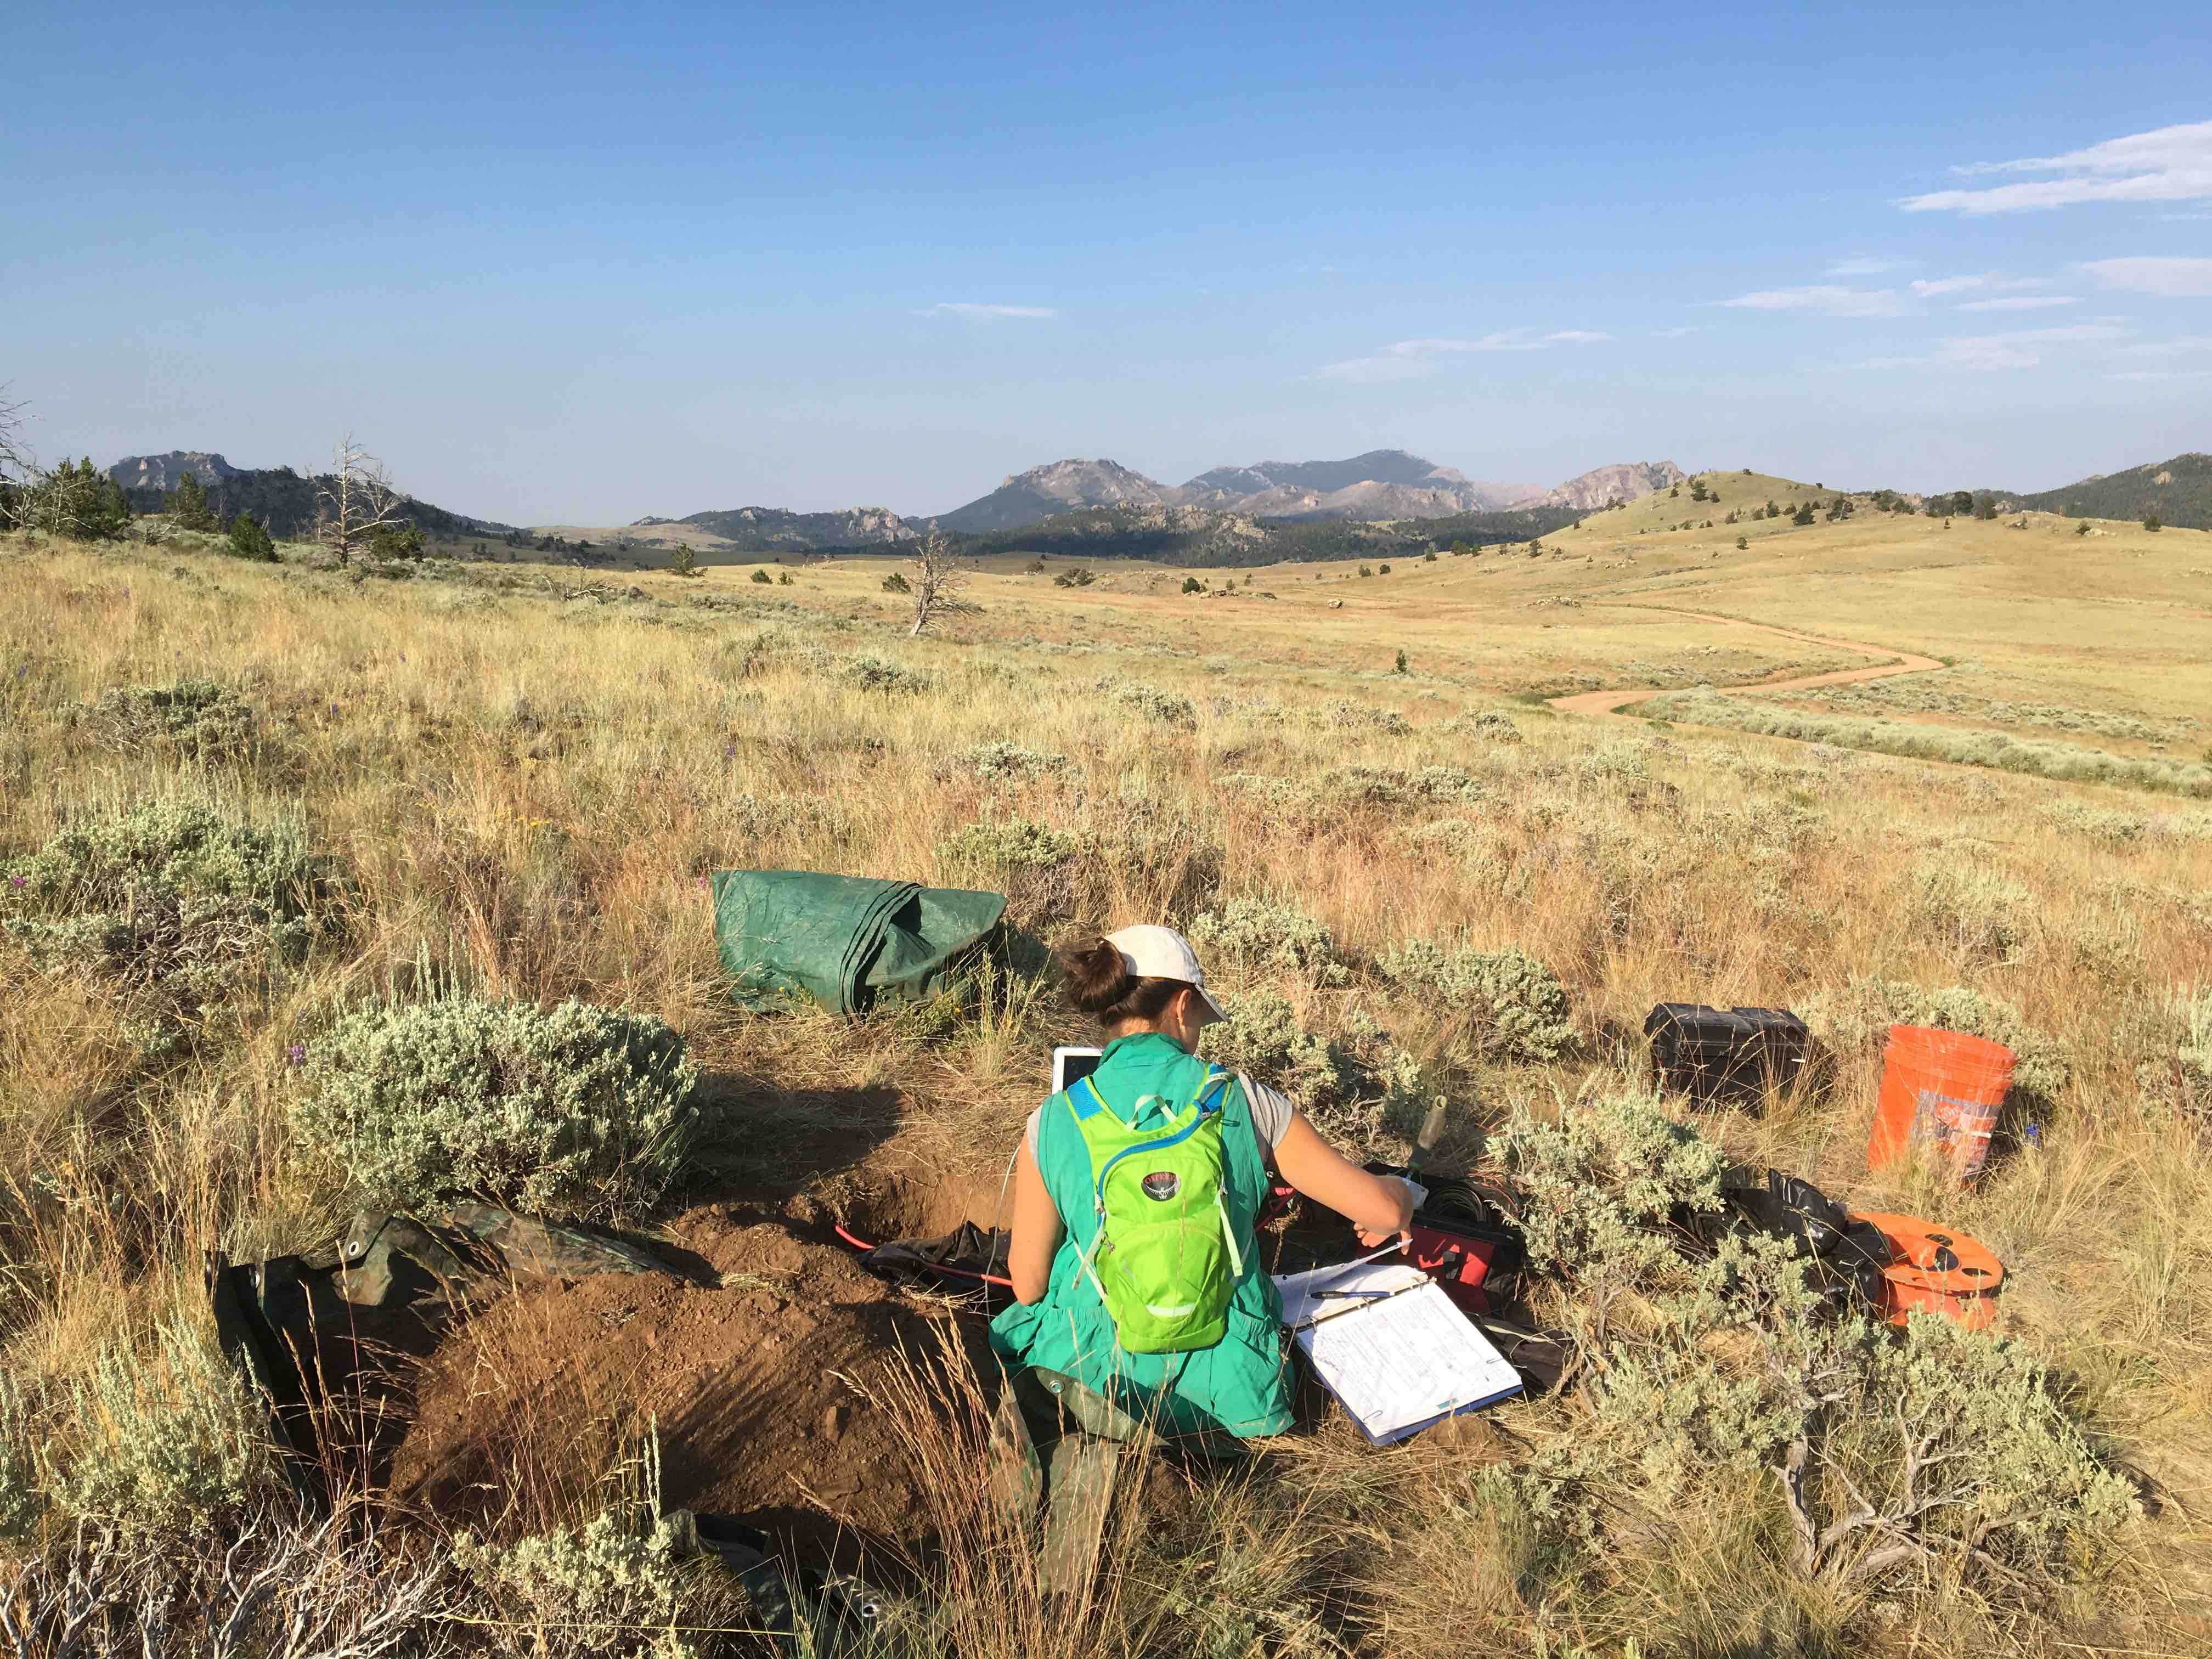 Eva sitting in a dry grassy field with a view of mountains in the background. Starting magnetotelluric data acquisition, Wyoming.